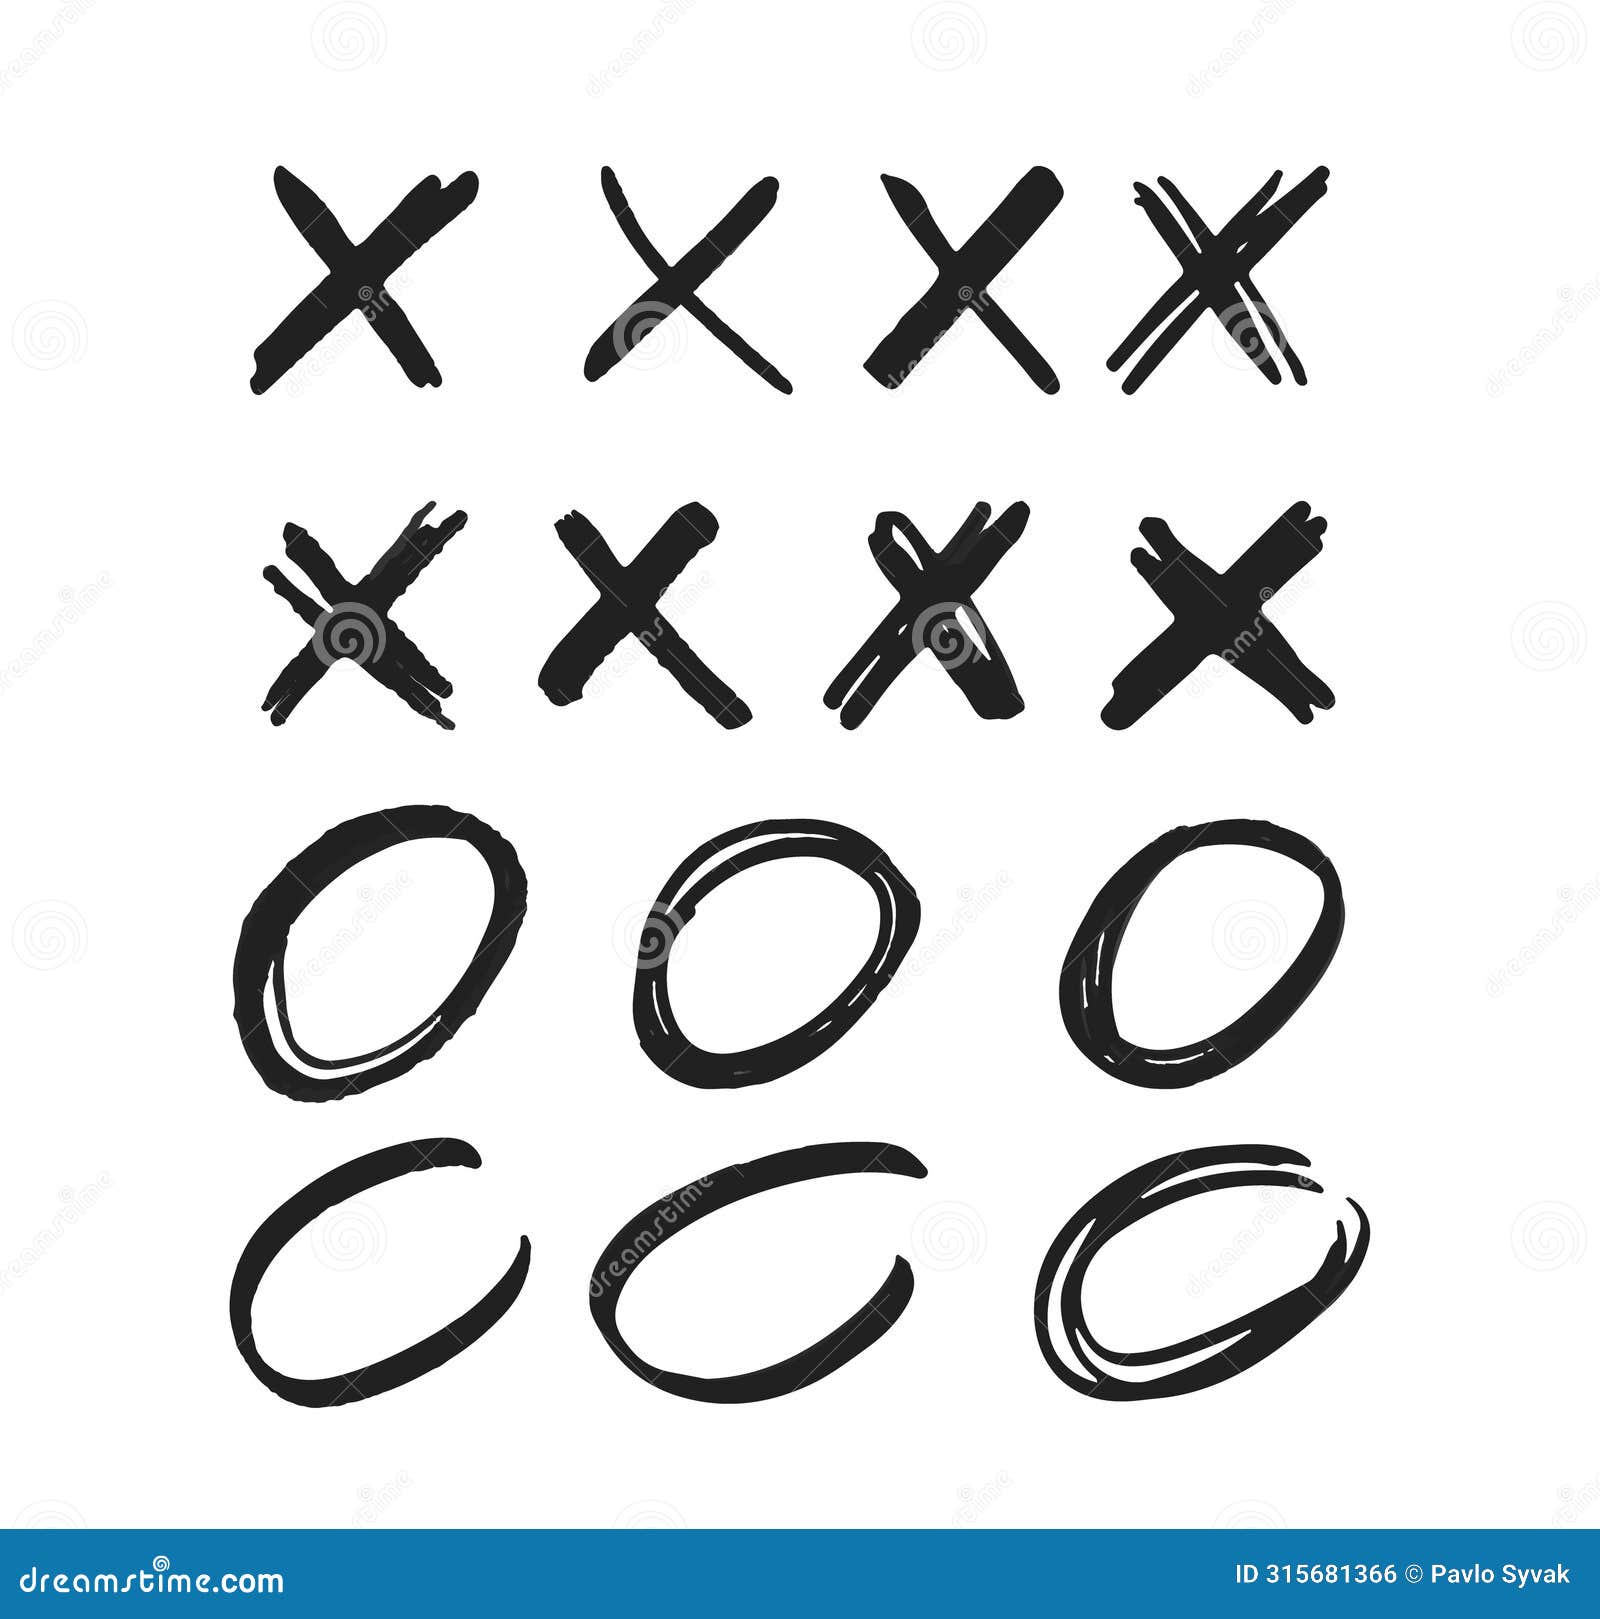 crosses and circles manuscript marks.   monochrome x or o signs on white background. writing s